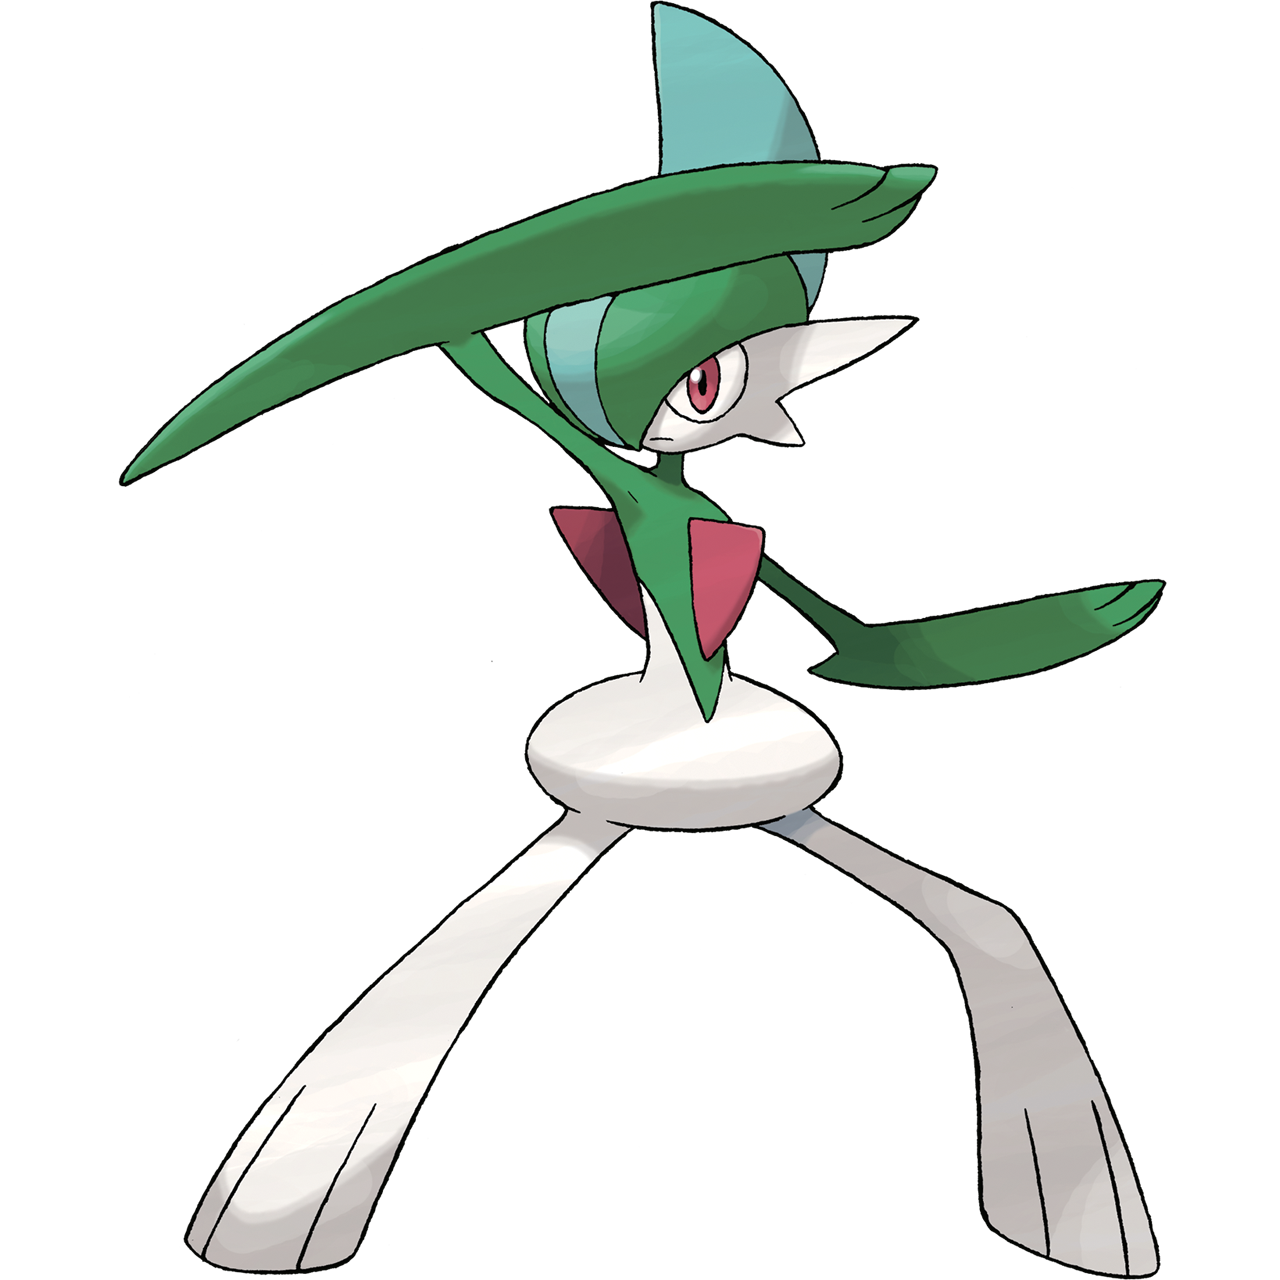 0475Gallade.png